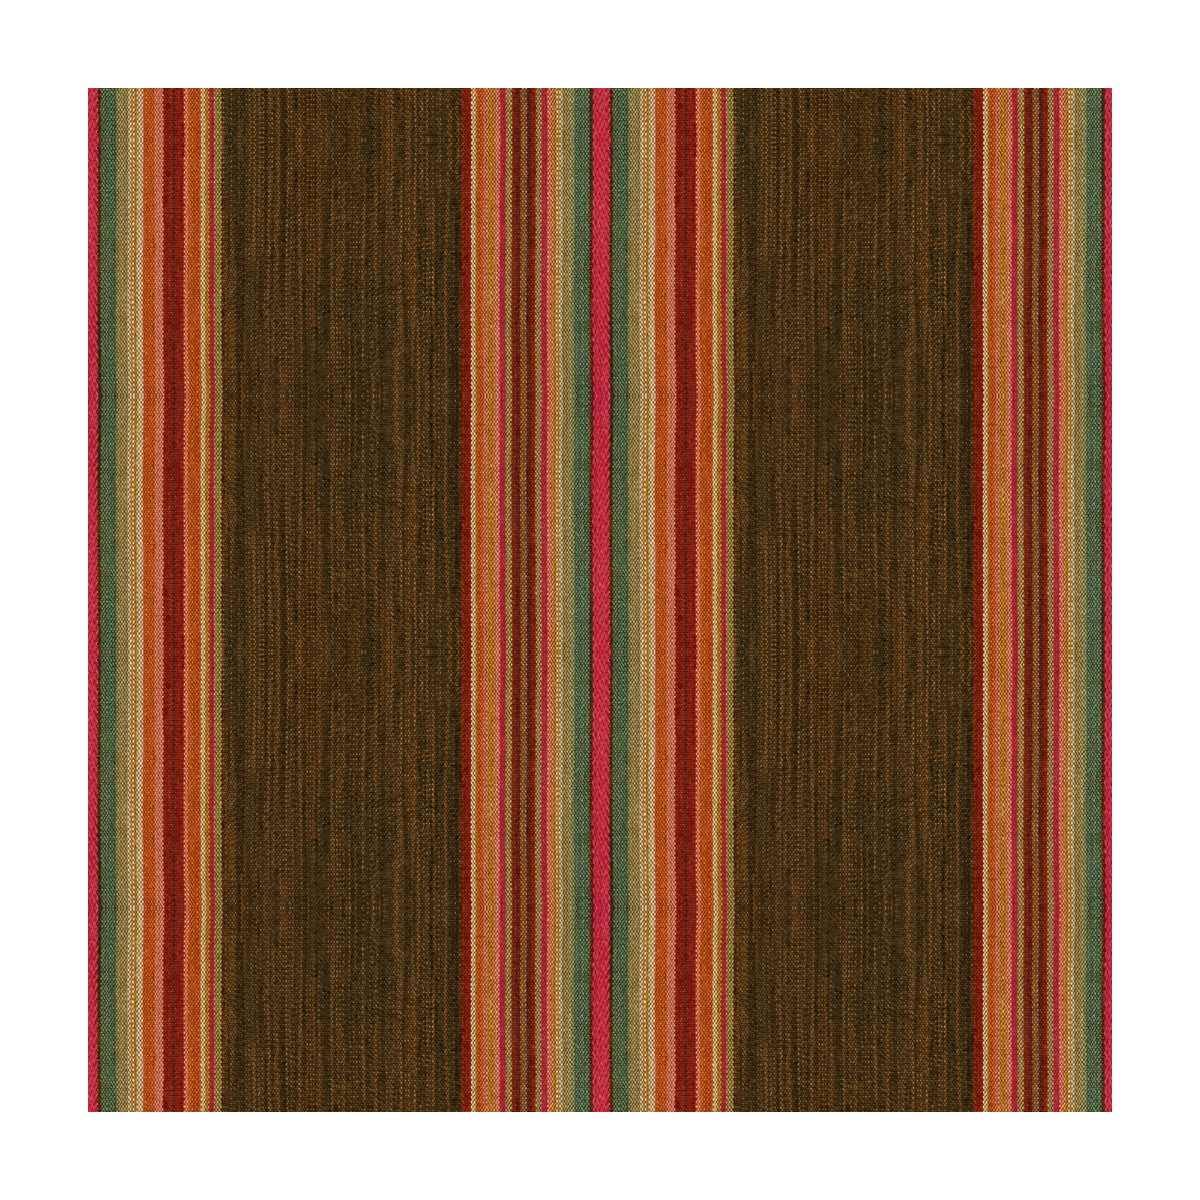 Gaban Stripe fabric in sundance color - pattern 33808.624.0 - by Kravet Design in the Museum Of New Mexico collection